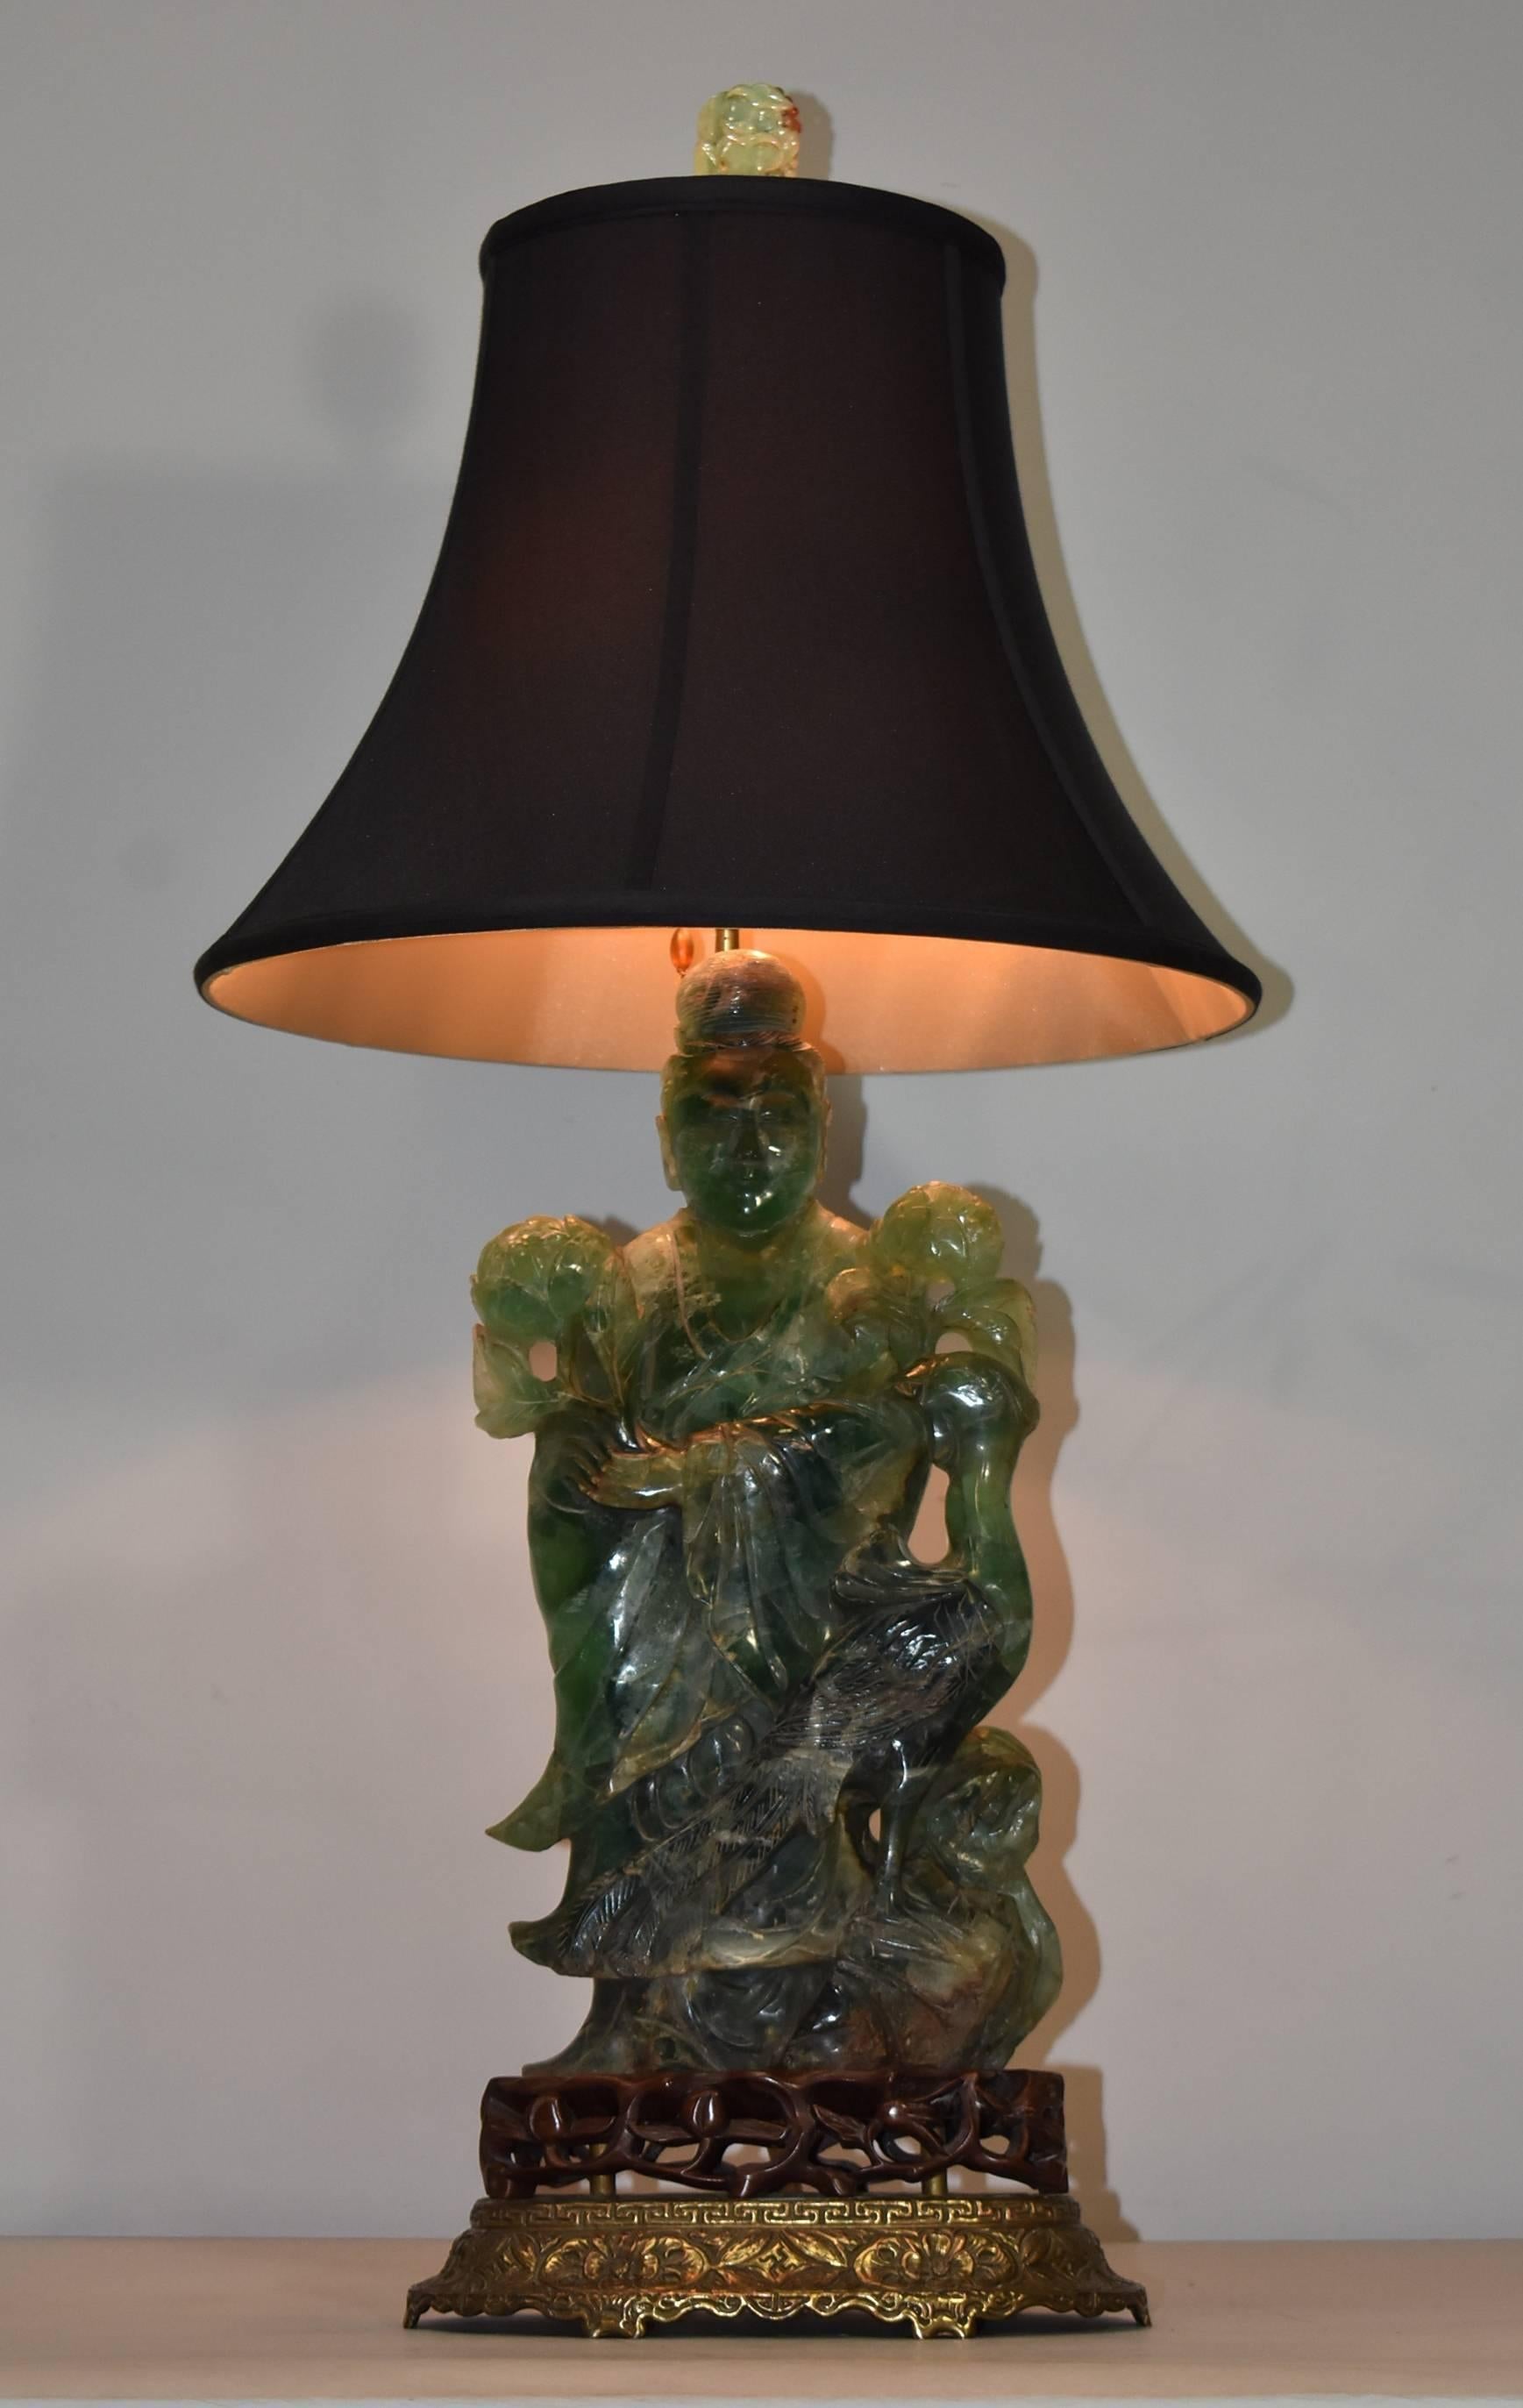 A unique large-scale turn of the century lamp. The lamp features a green quartz carved statue of Quan Yin with her peacock. Statue is afixed to a pierced teakwood base which sits atop an embossed, impressed and shaped Brass Stand with floral motif.